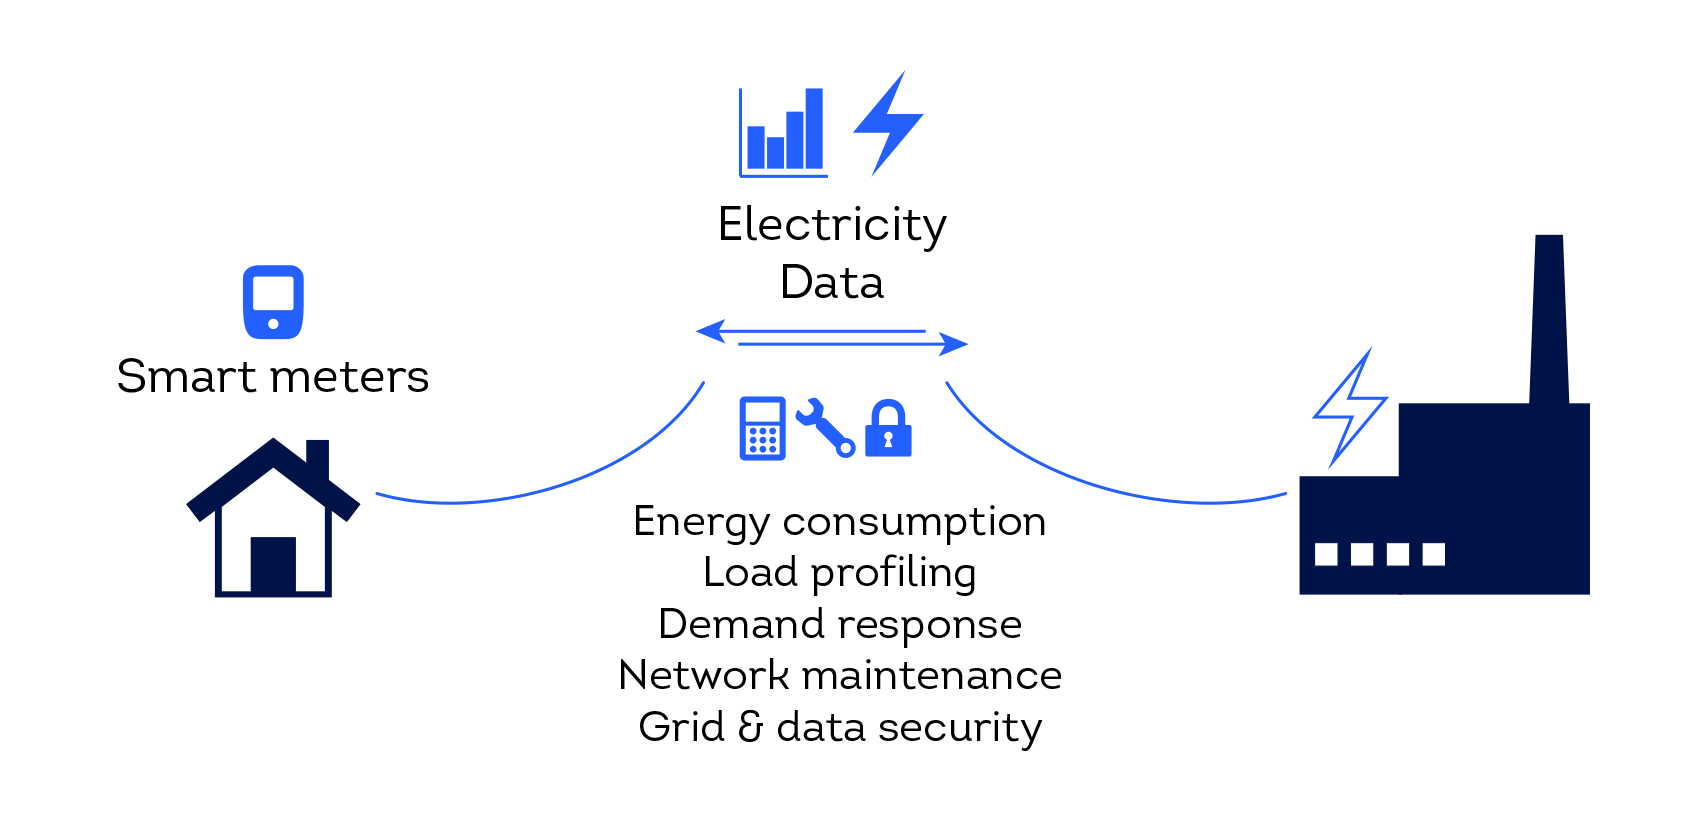 An illustration depicting the operating principle of a smart grid: two-way transfer of electricity and data within the grid, and business opportunities related to smart grids: tracking energy consumption, load profiling, responding to electricity demand, monitoring of network maintenance needs, and data security within the grid.